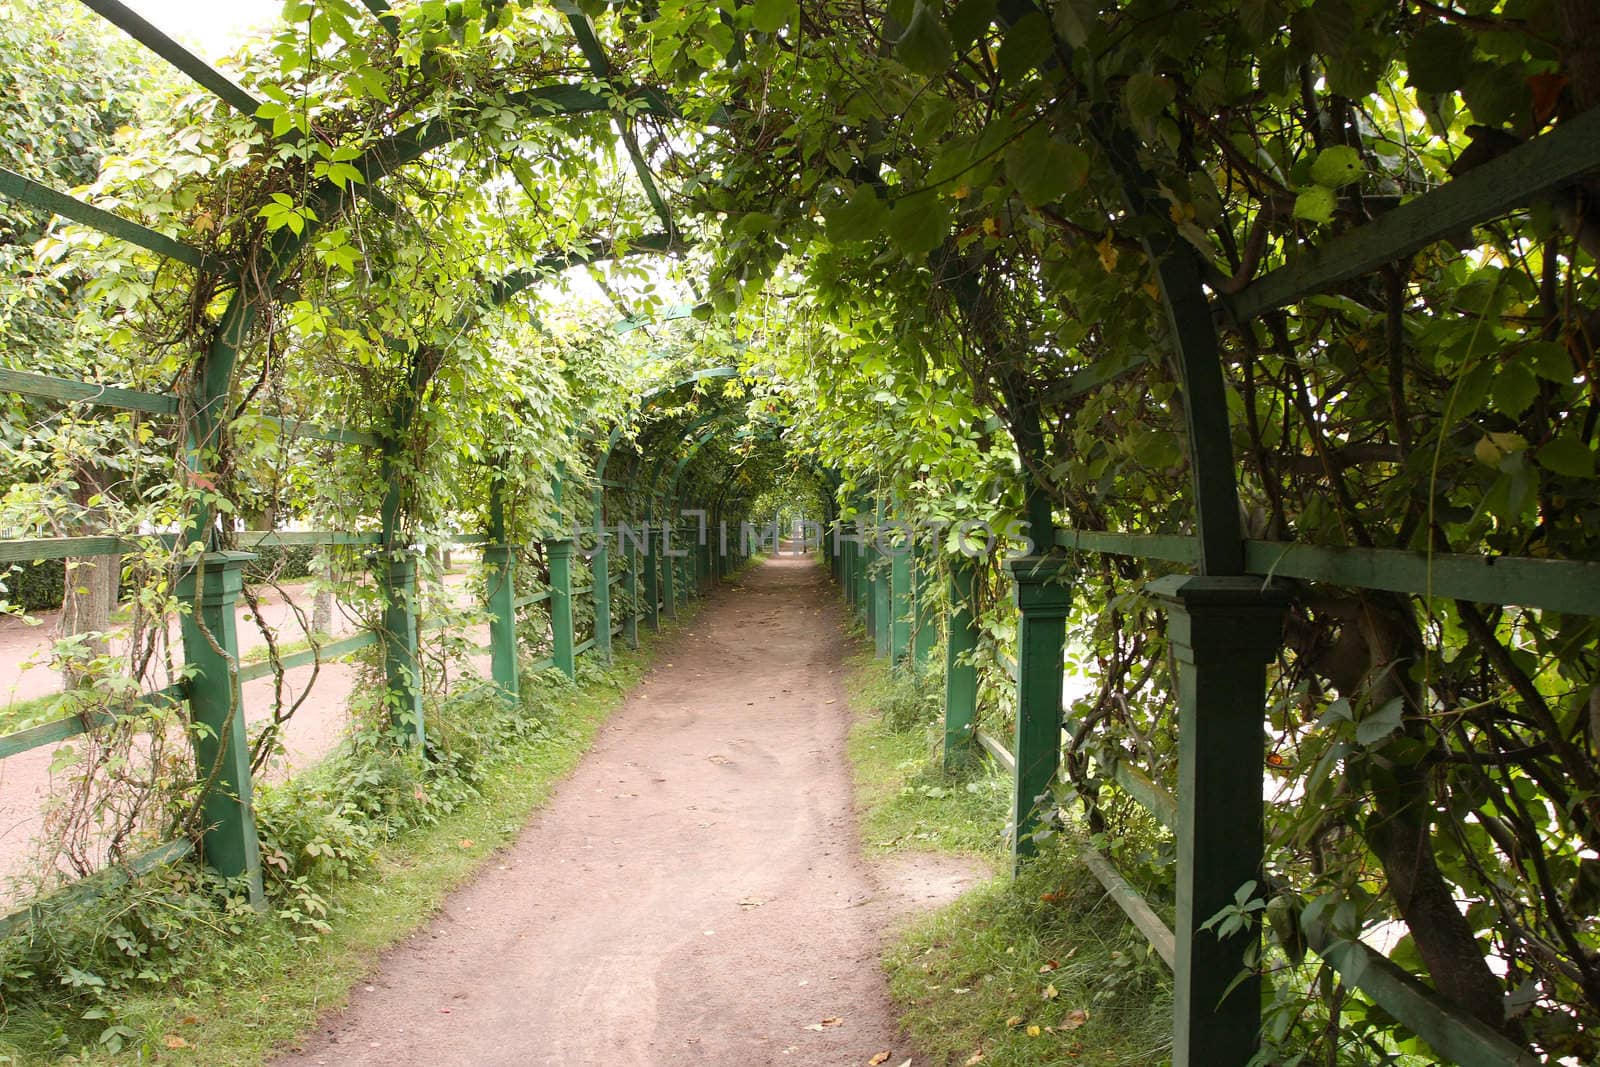 Pathway through grapevine covered 